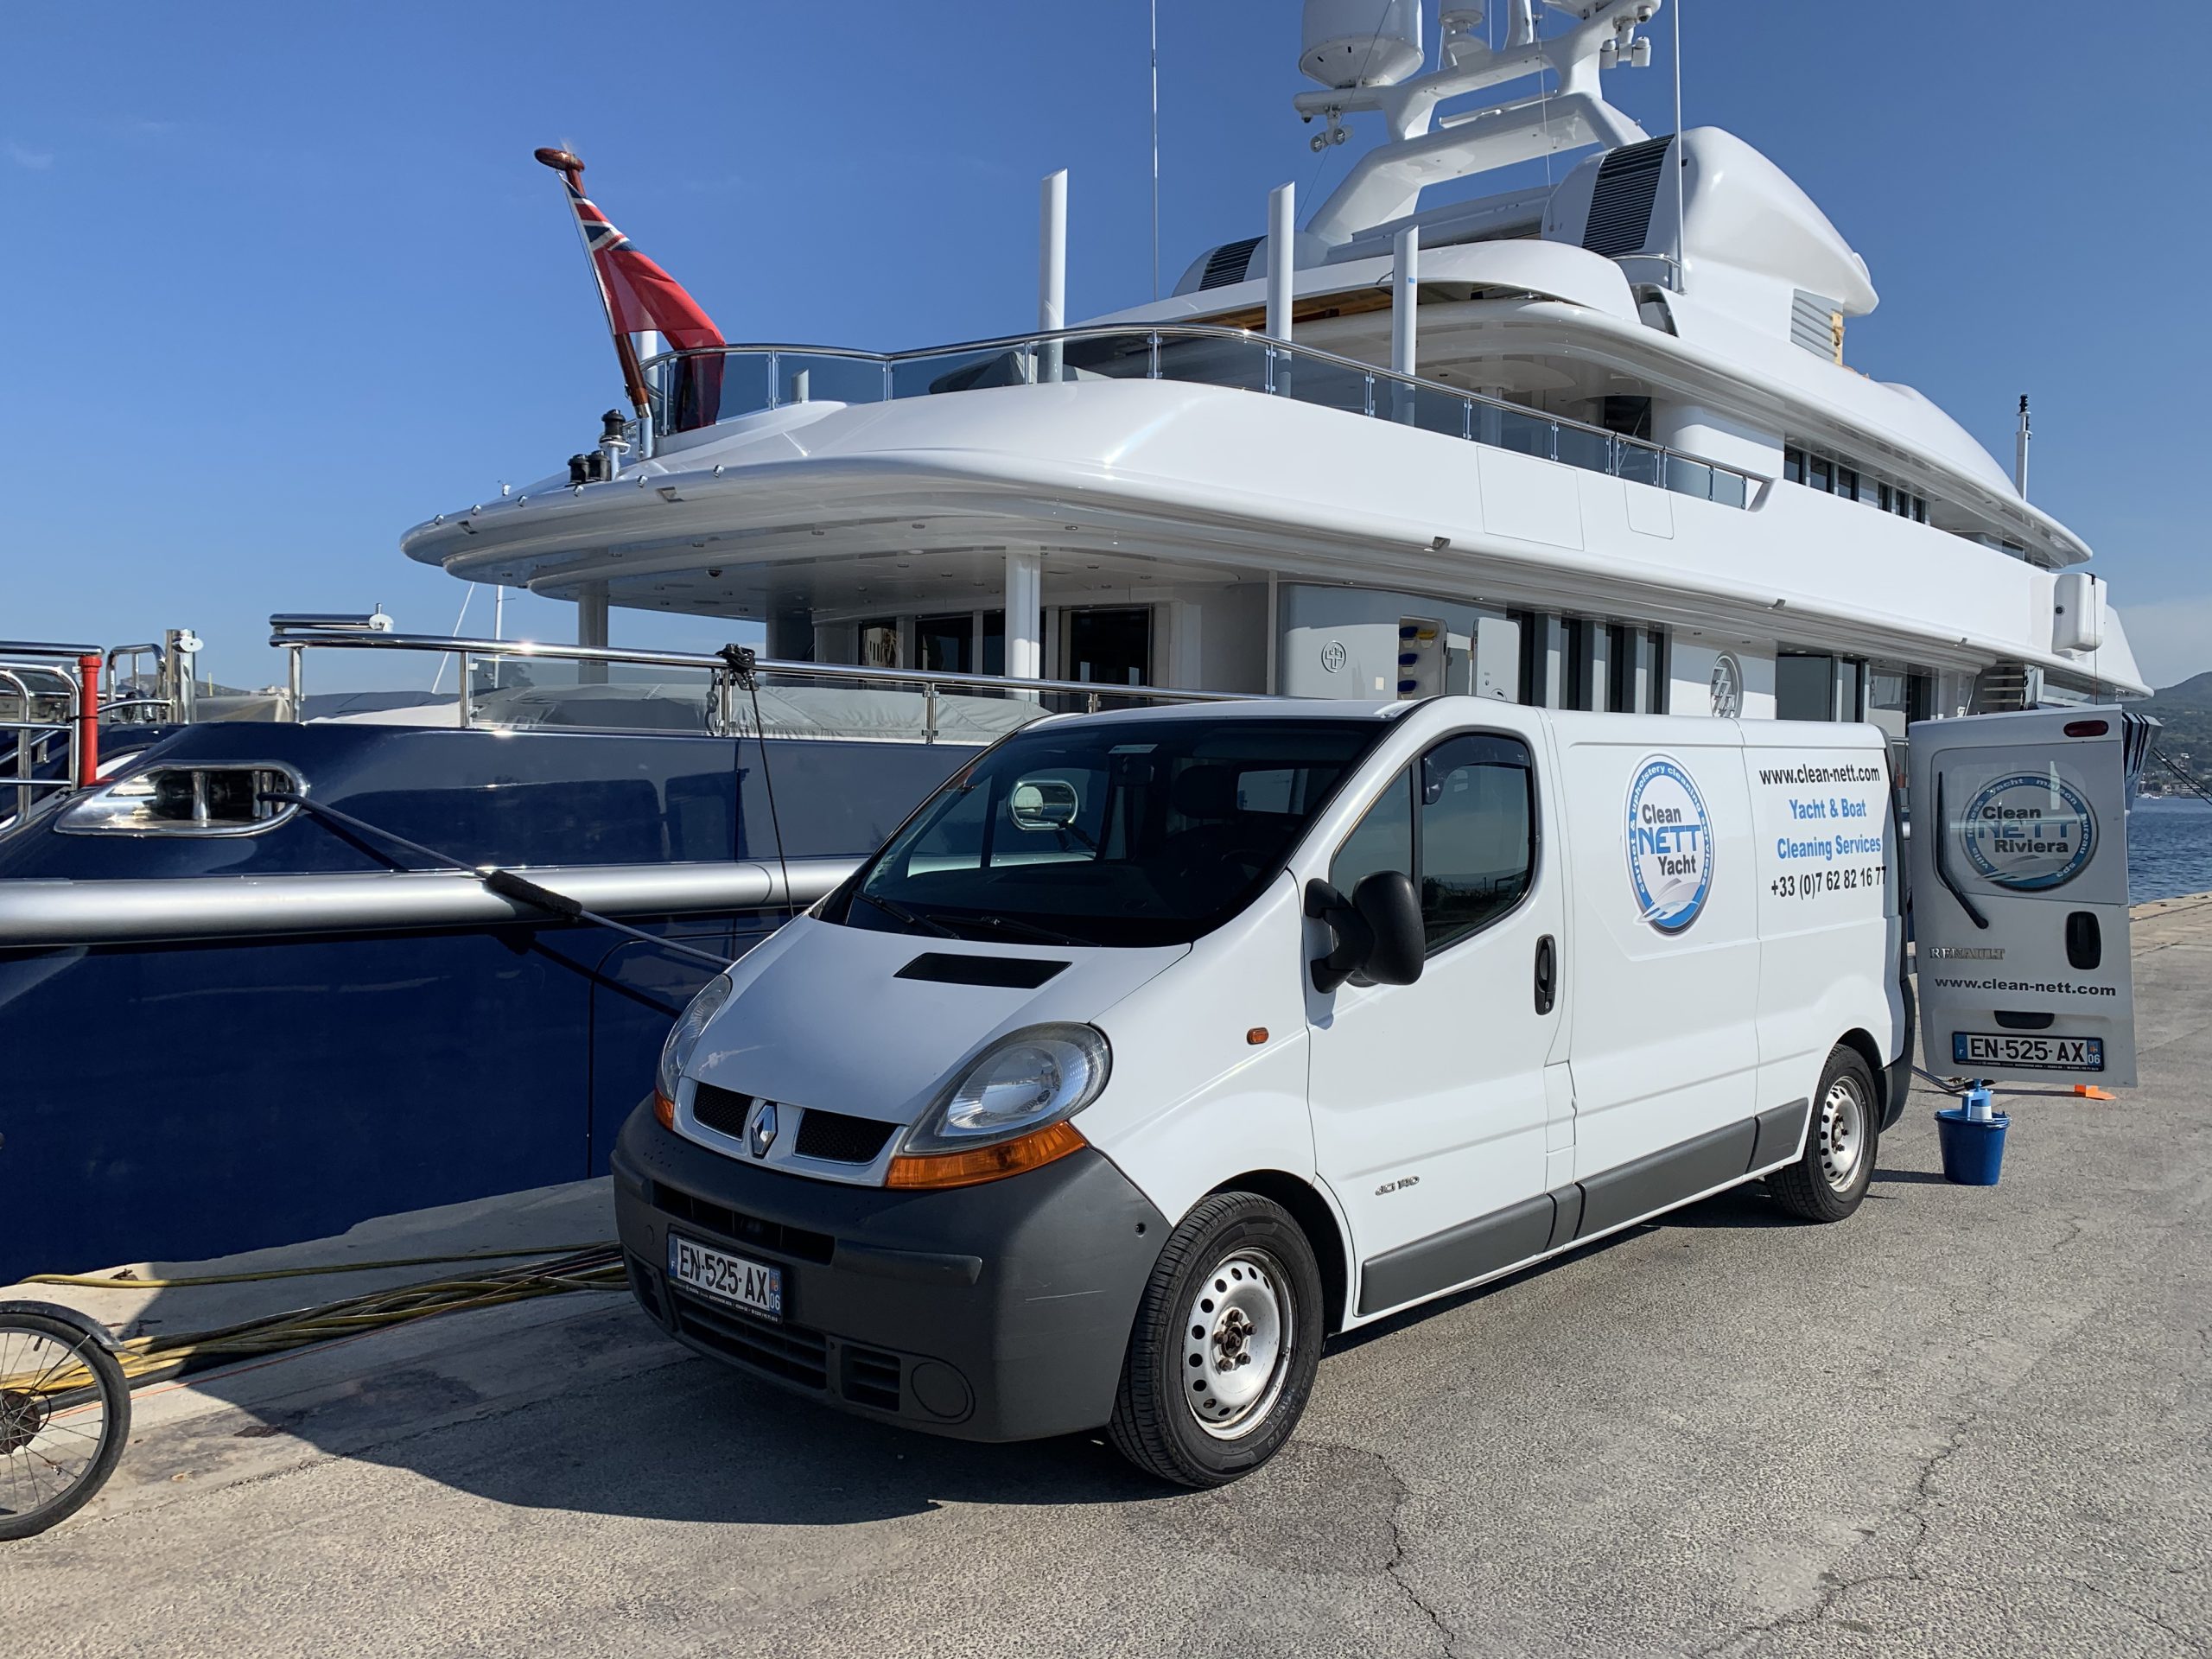 Professional Yacht Cleaning Services in Côte d'Azur and Monaco